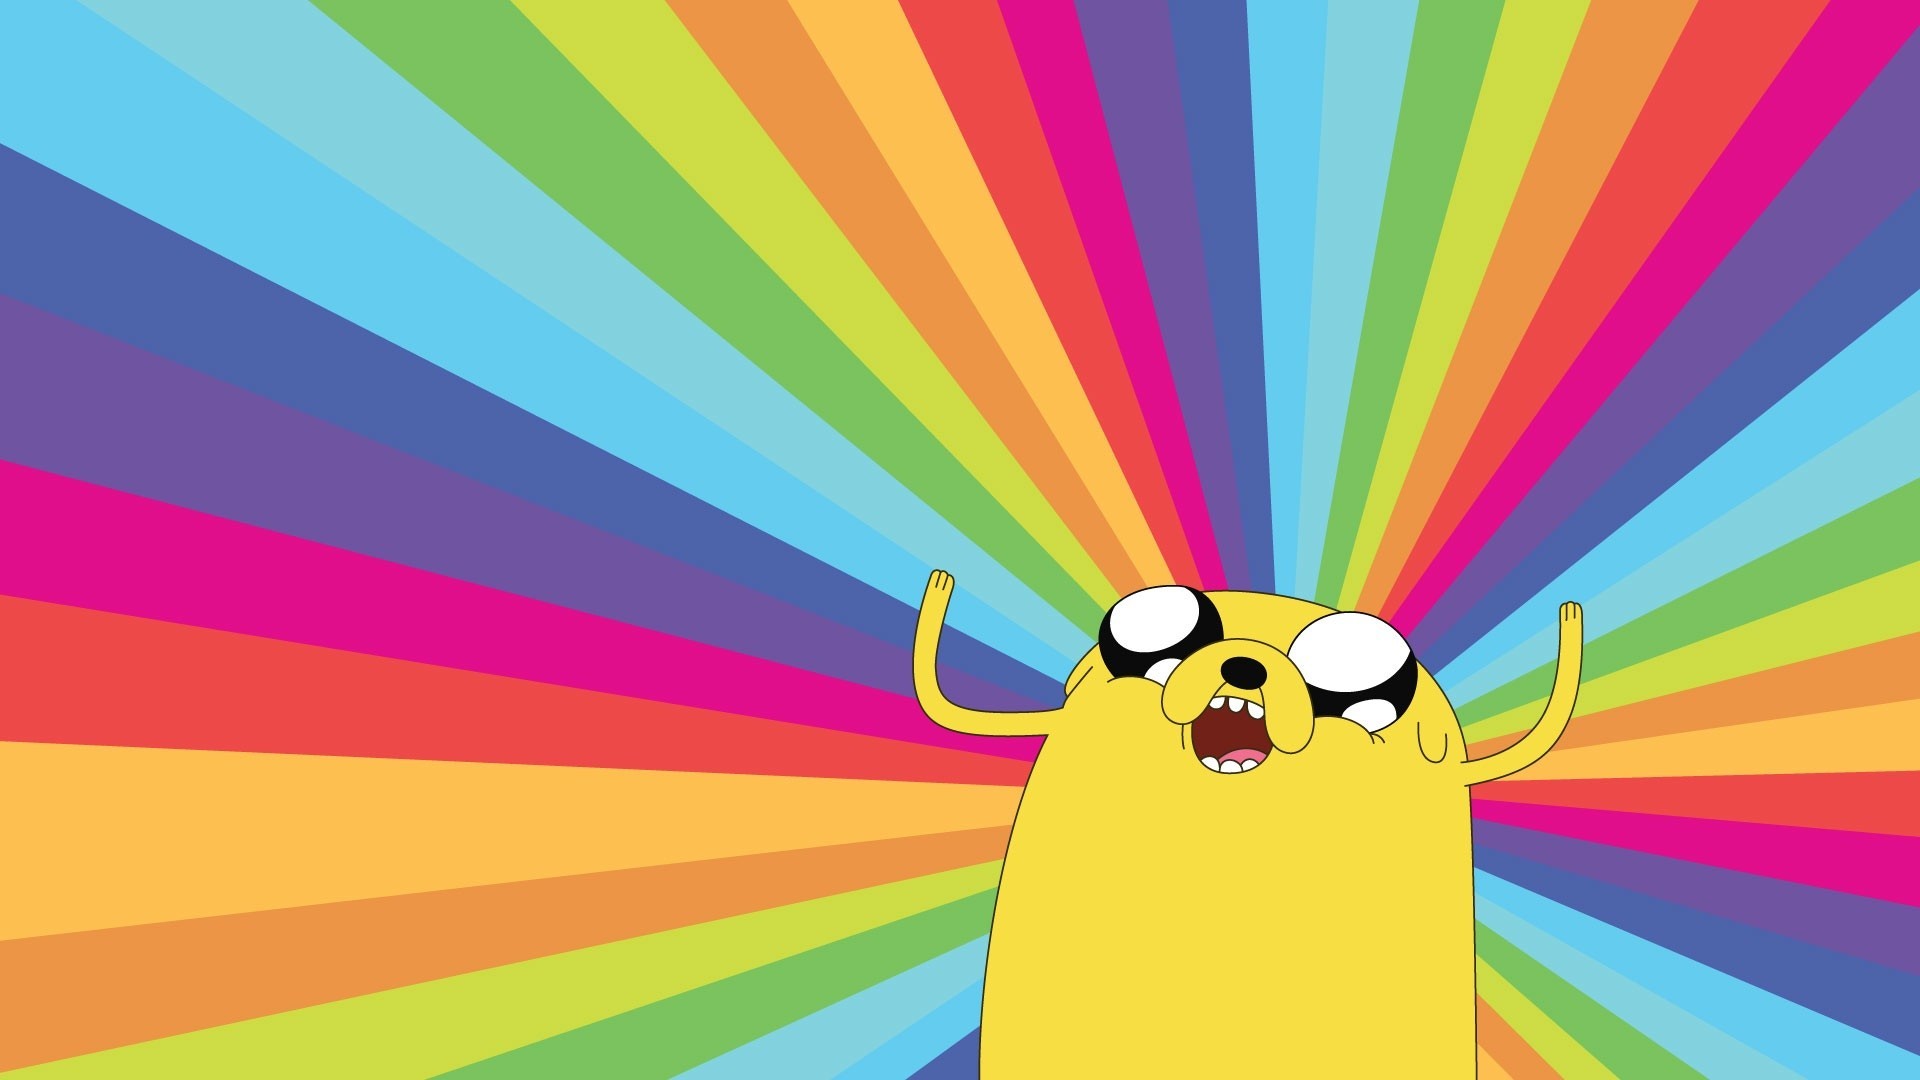 1920x1080 Adventure Time With Finn And Jake The Dog Rainbows